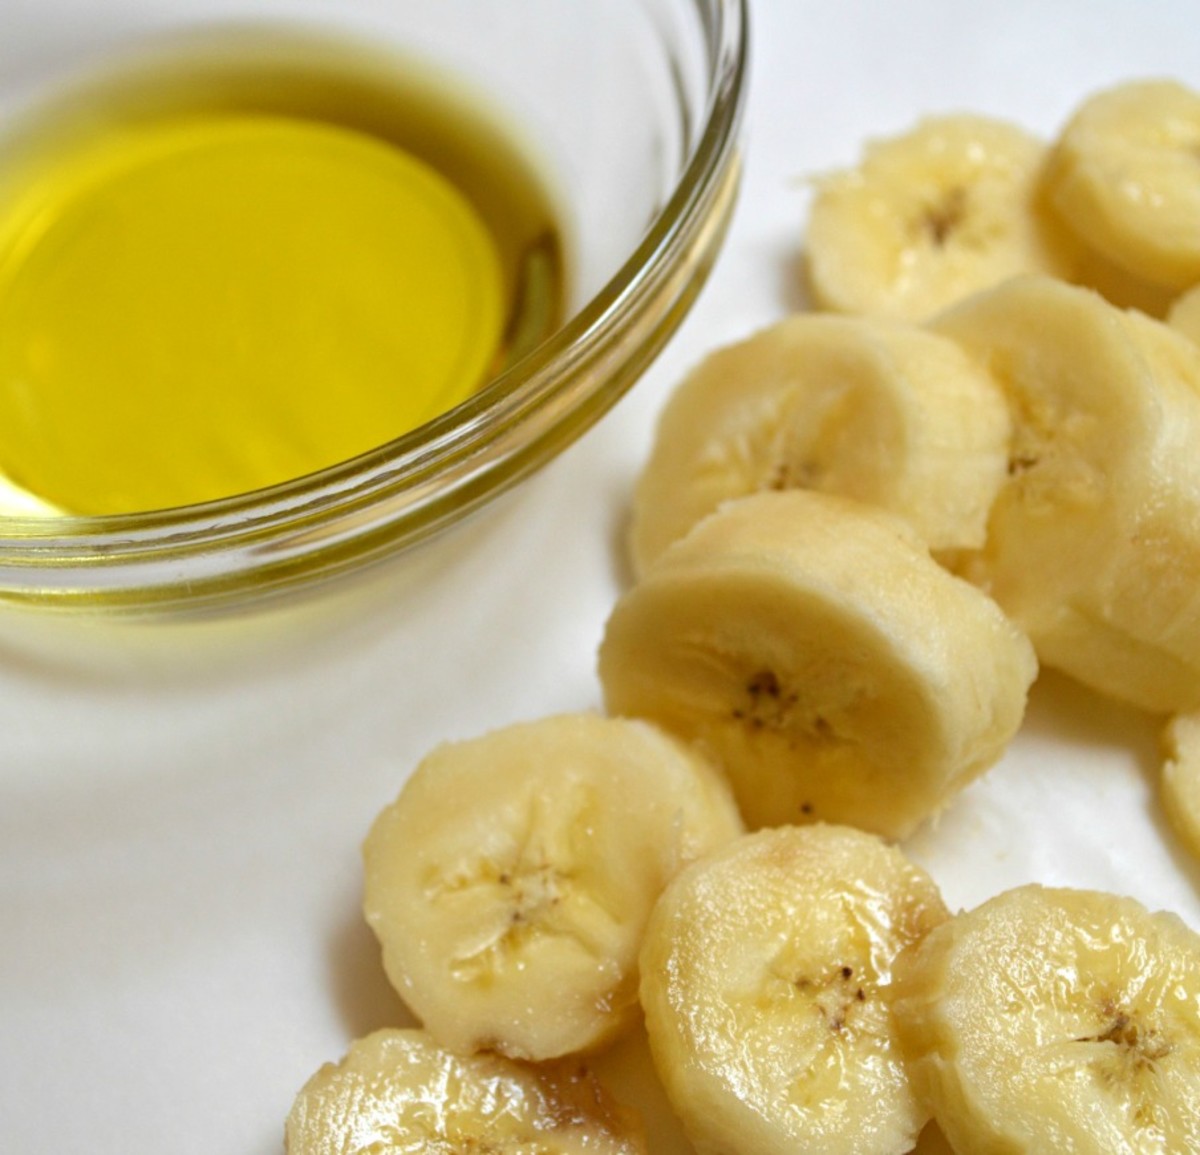 Banana And Olive Oil Mask